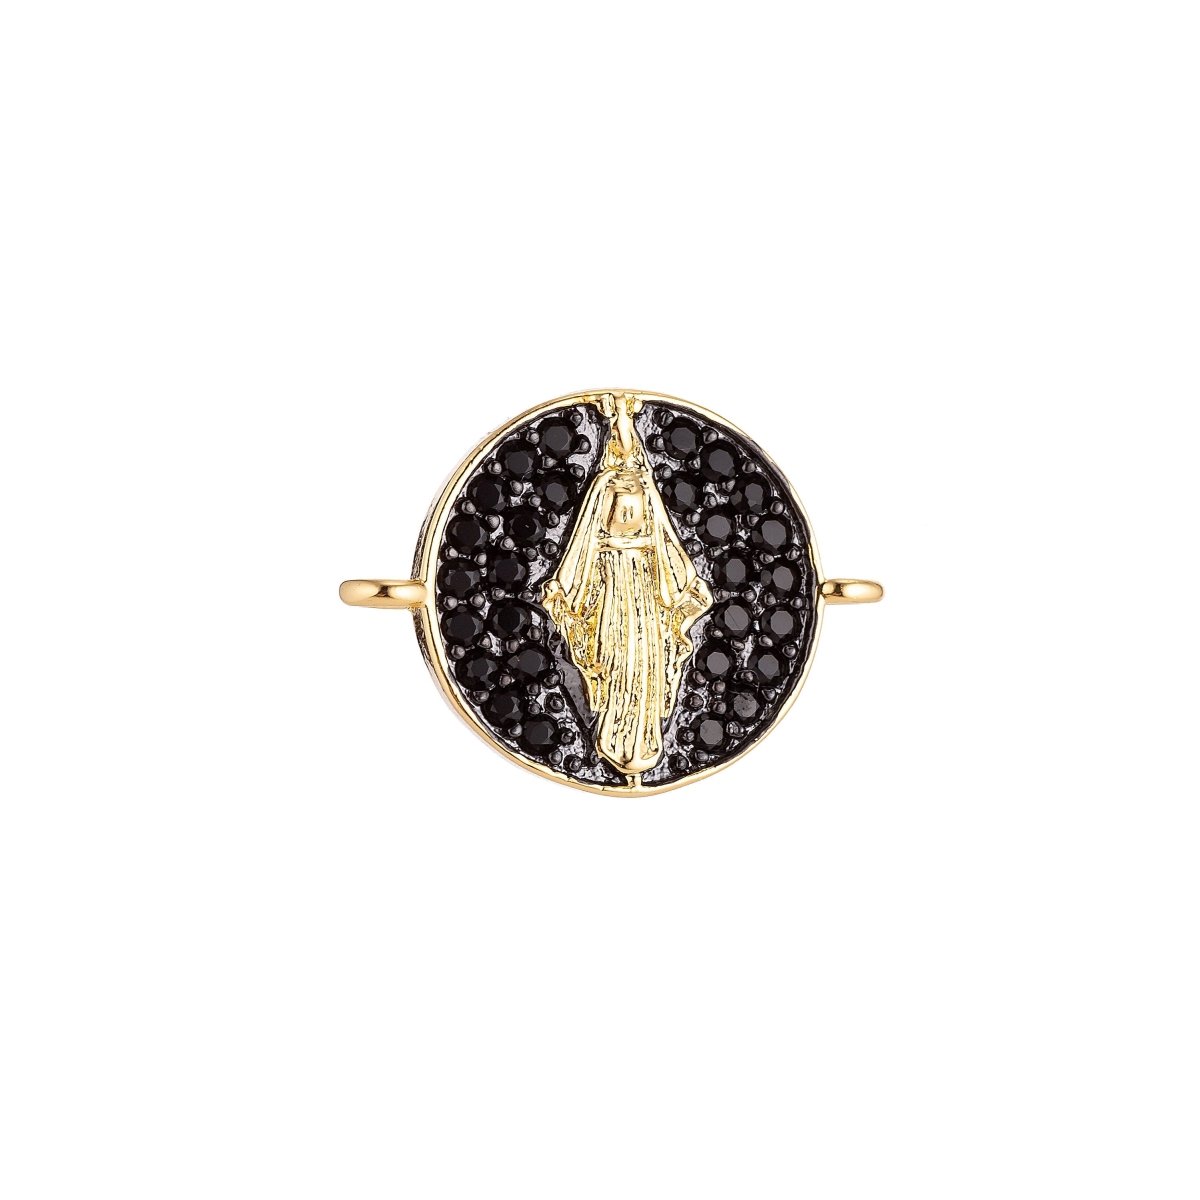 On Sale! CLEARANCE! 18K Gold Filled, Silver, Black Jesus Mother Mary Catholic Medallion, Cubic Zirconia Bracelet Charm, Micro Pave Connector For Necklace Bracelet Jewelry Making | F-077 - DLUXCA